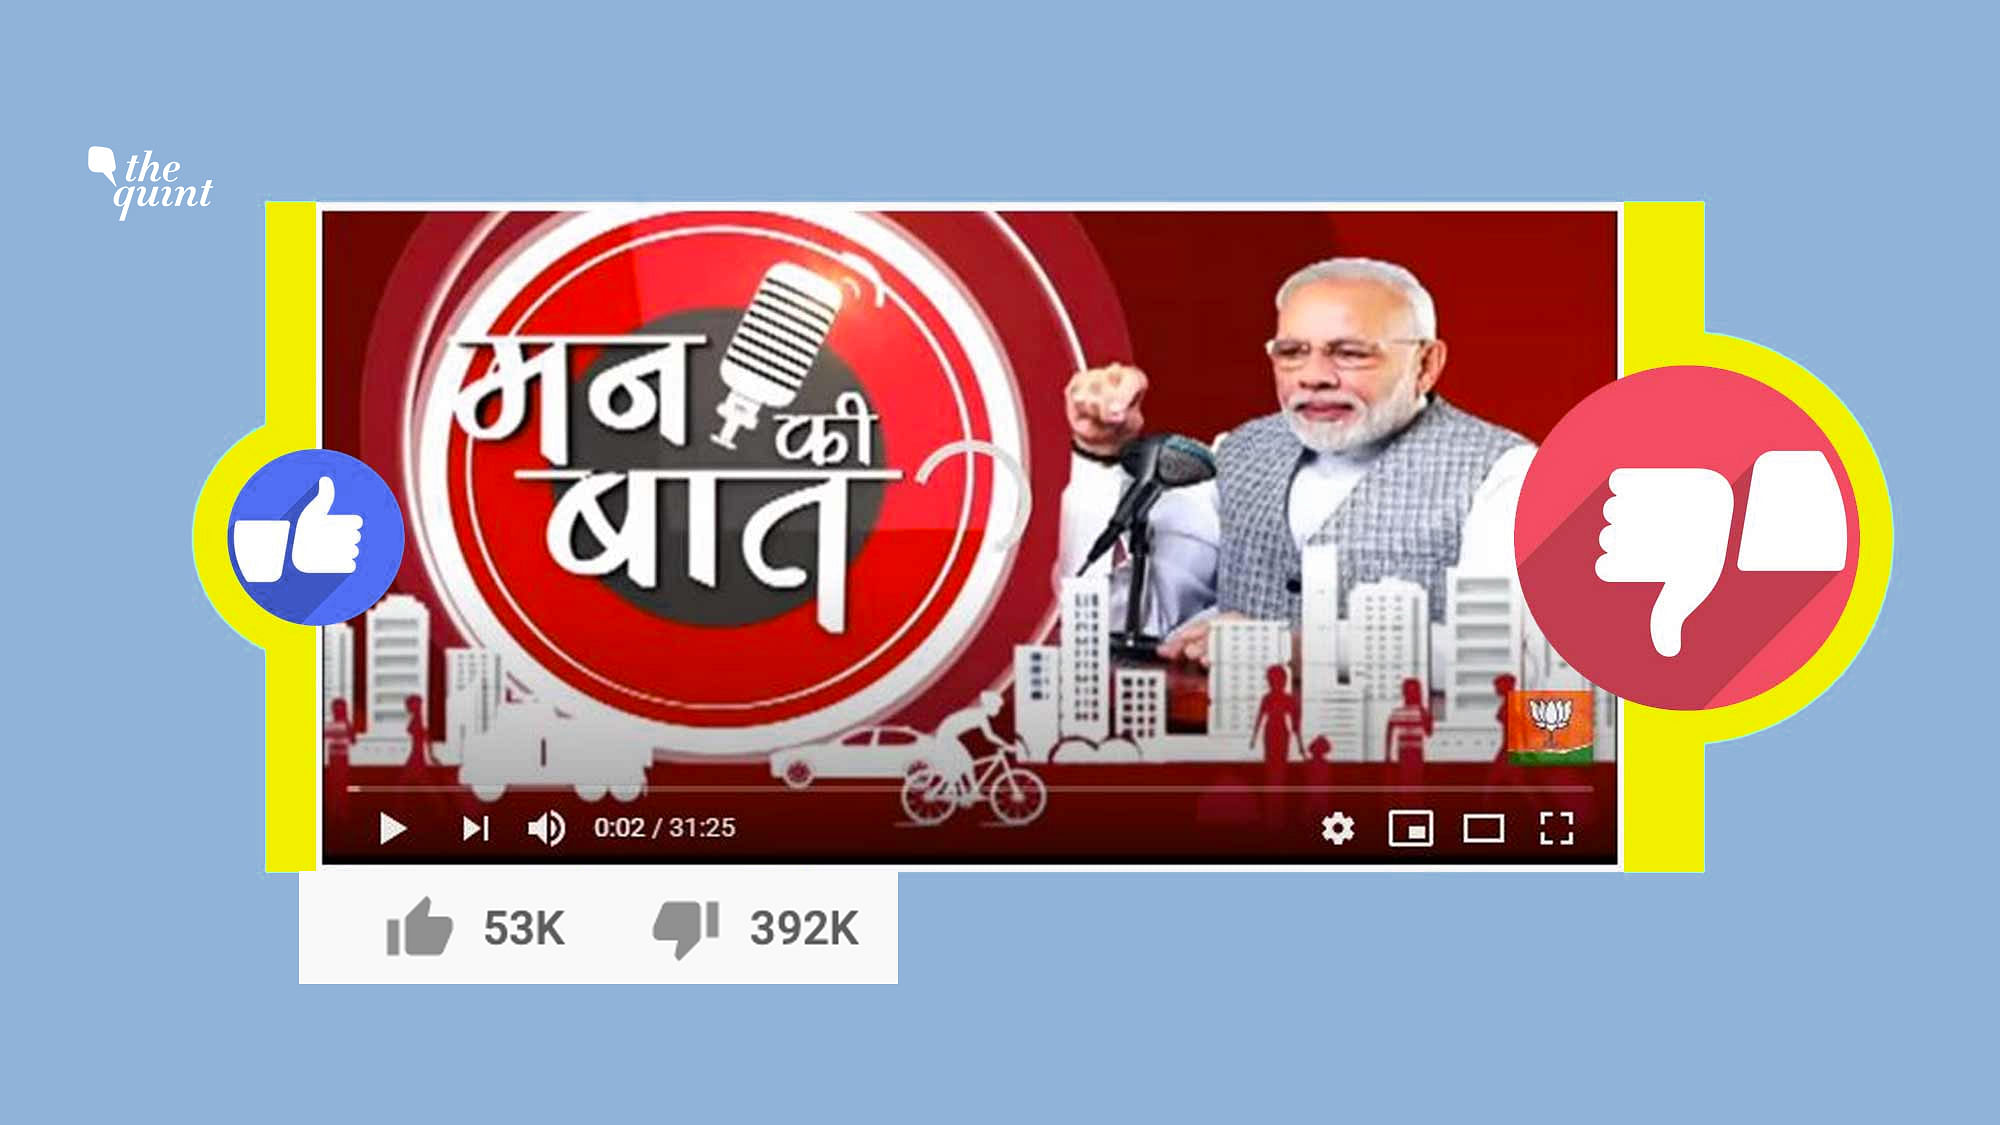 On BJP’s official channel, the number of ‘dislikes’ decreased from 1.90 lakh to 1.80 lakh and on Narendra Modi channel it went down by 5,000.